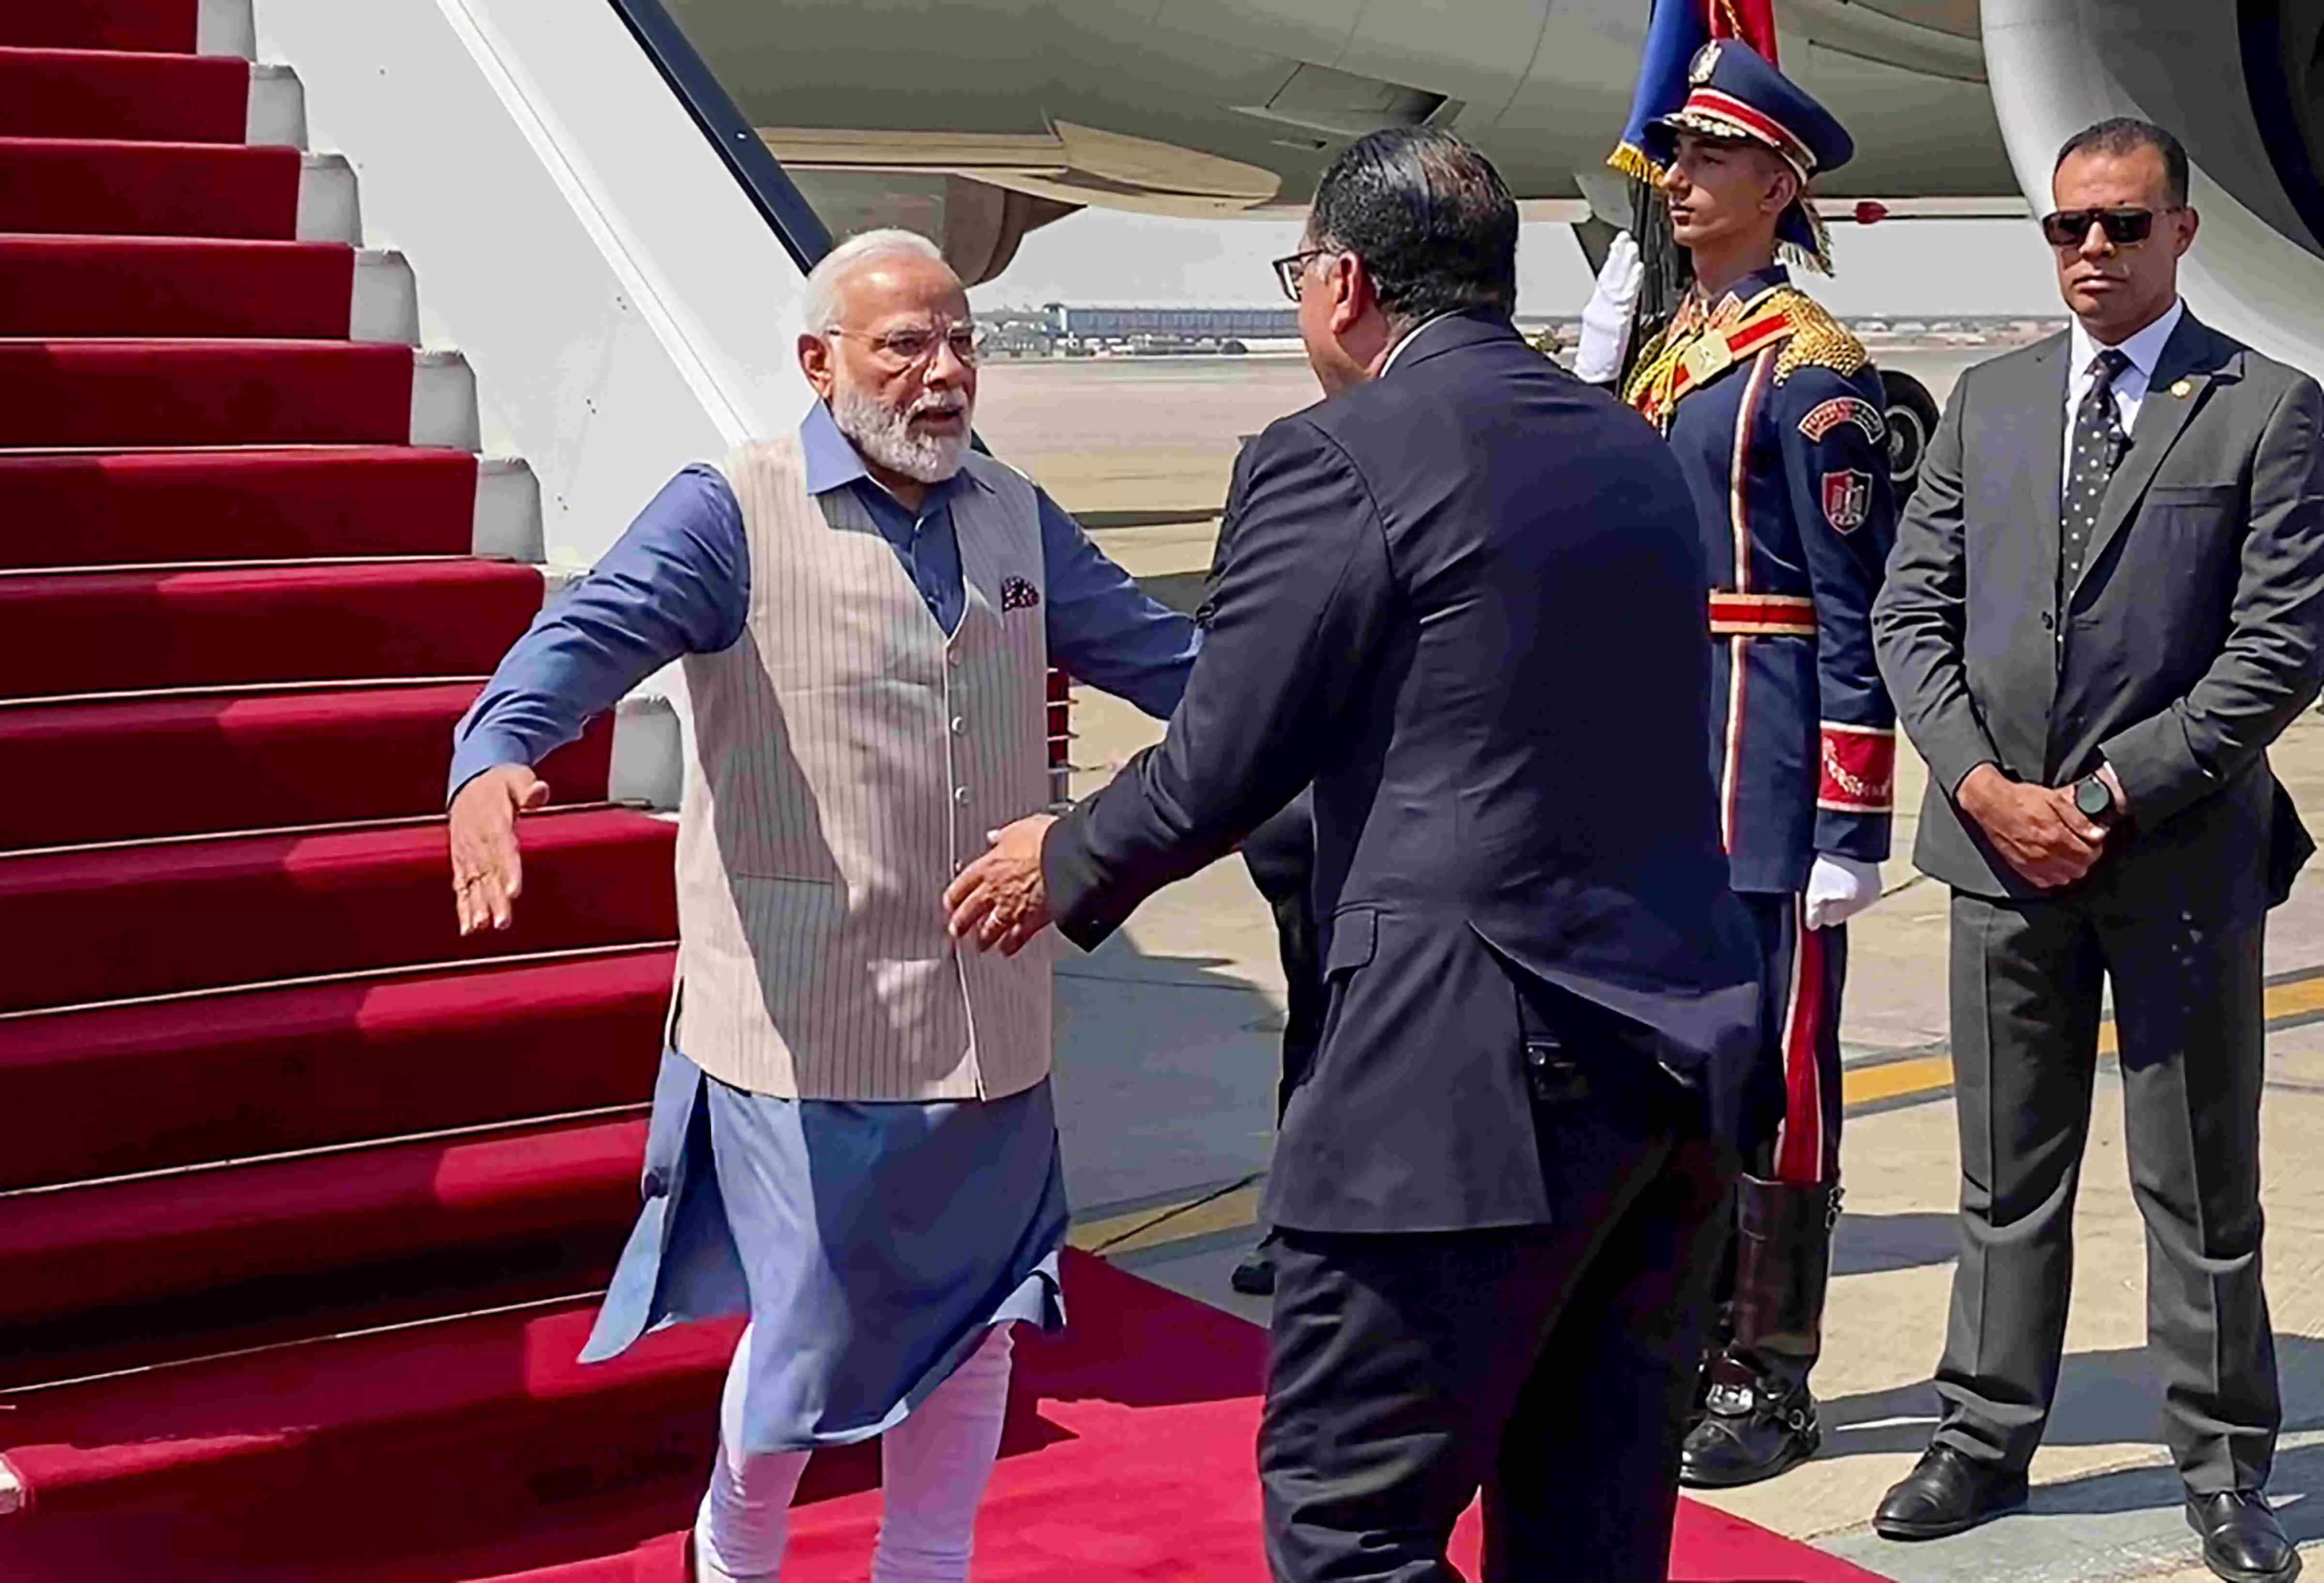 PM Modi meets Egyptian counterpart, top ministers; discusses deepening trade ties, strengthening strategic partnership